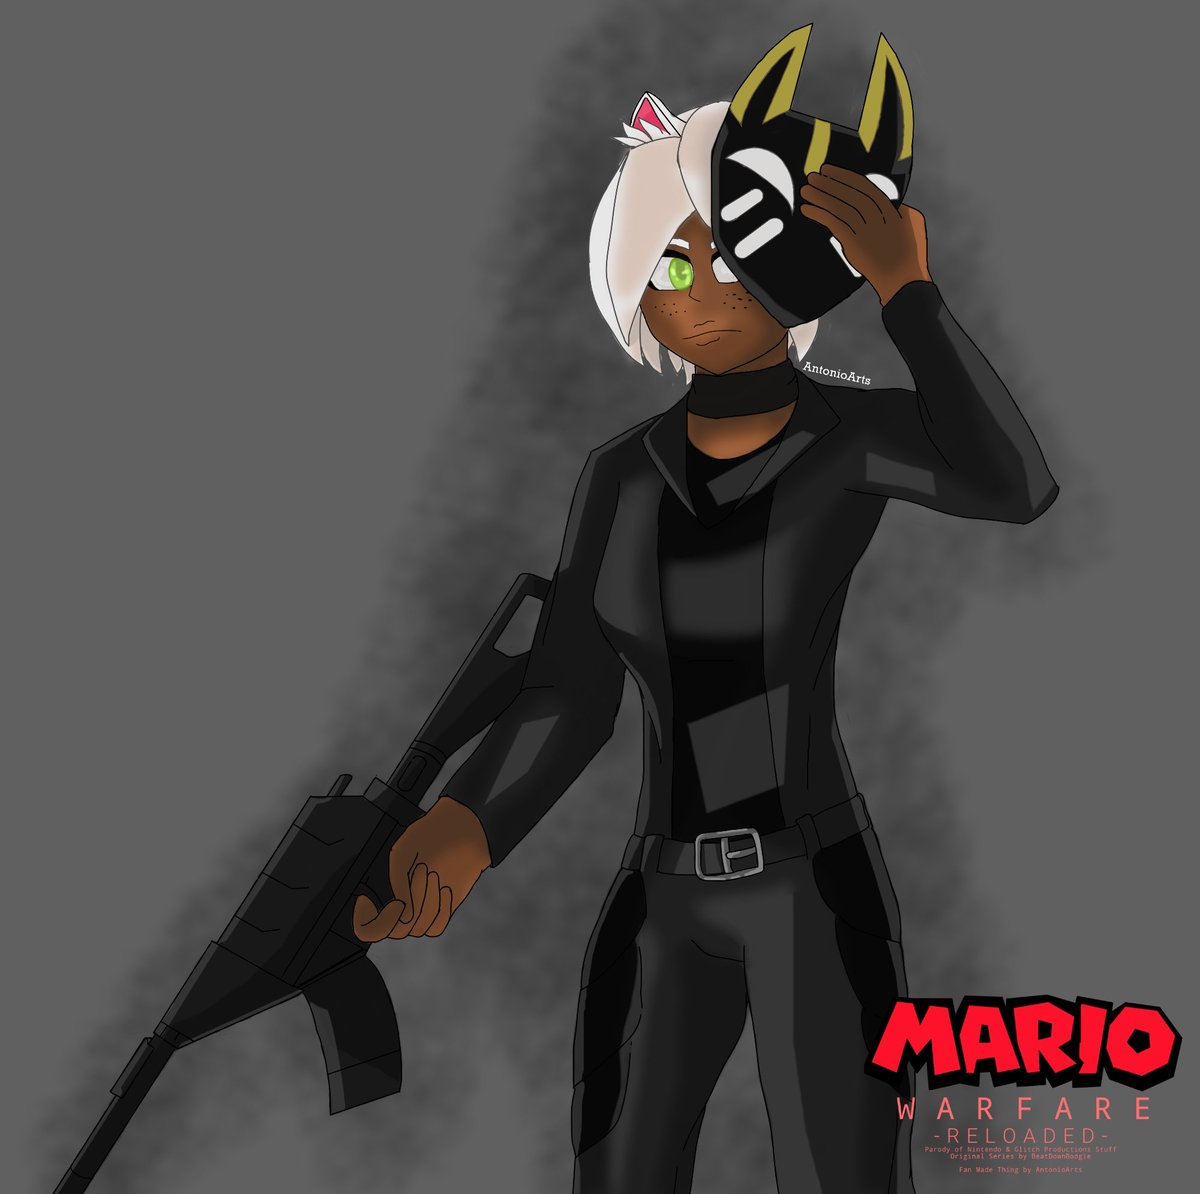 My version of Whisk from My AU - Mario Warfare Reloaded.
(I forgot her tail. Damnit)

❤️ & 🔄 are Much Appreciated.

#smg4 #smg4whisk #whisk #sunsetparadise #smg4au #mariowarfarereloaded #jumpsuit #catgirl #gun